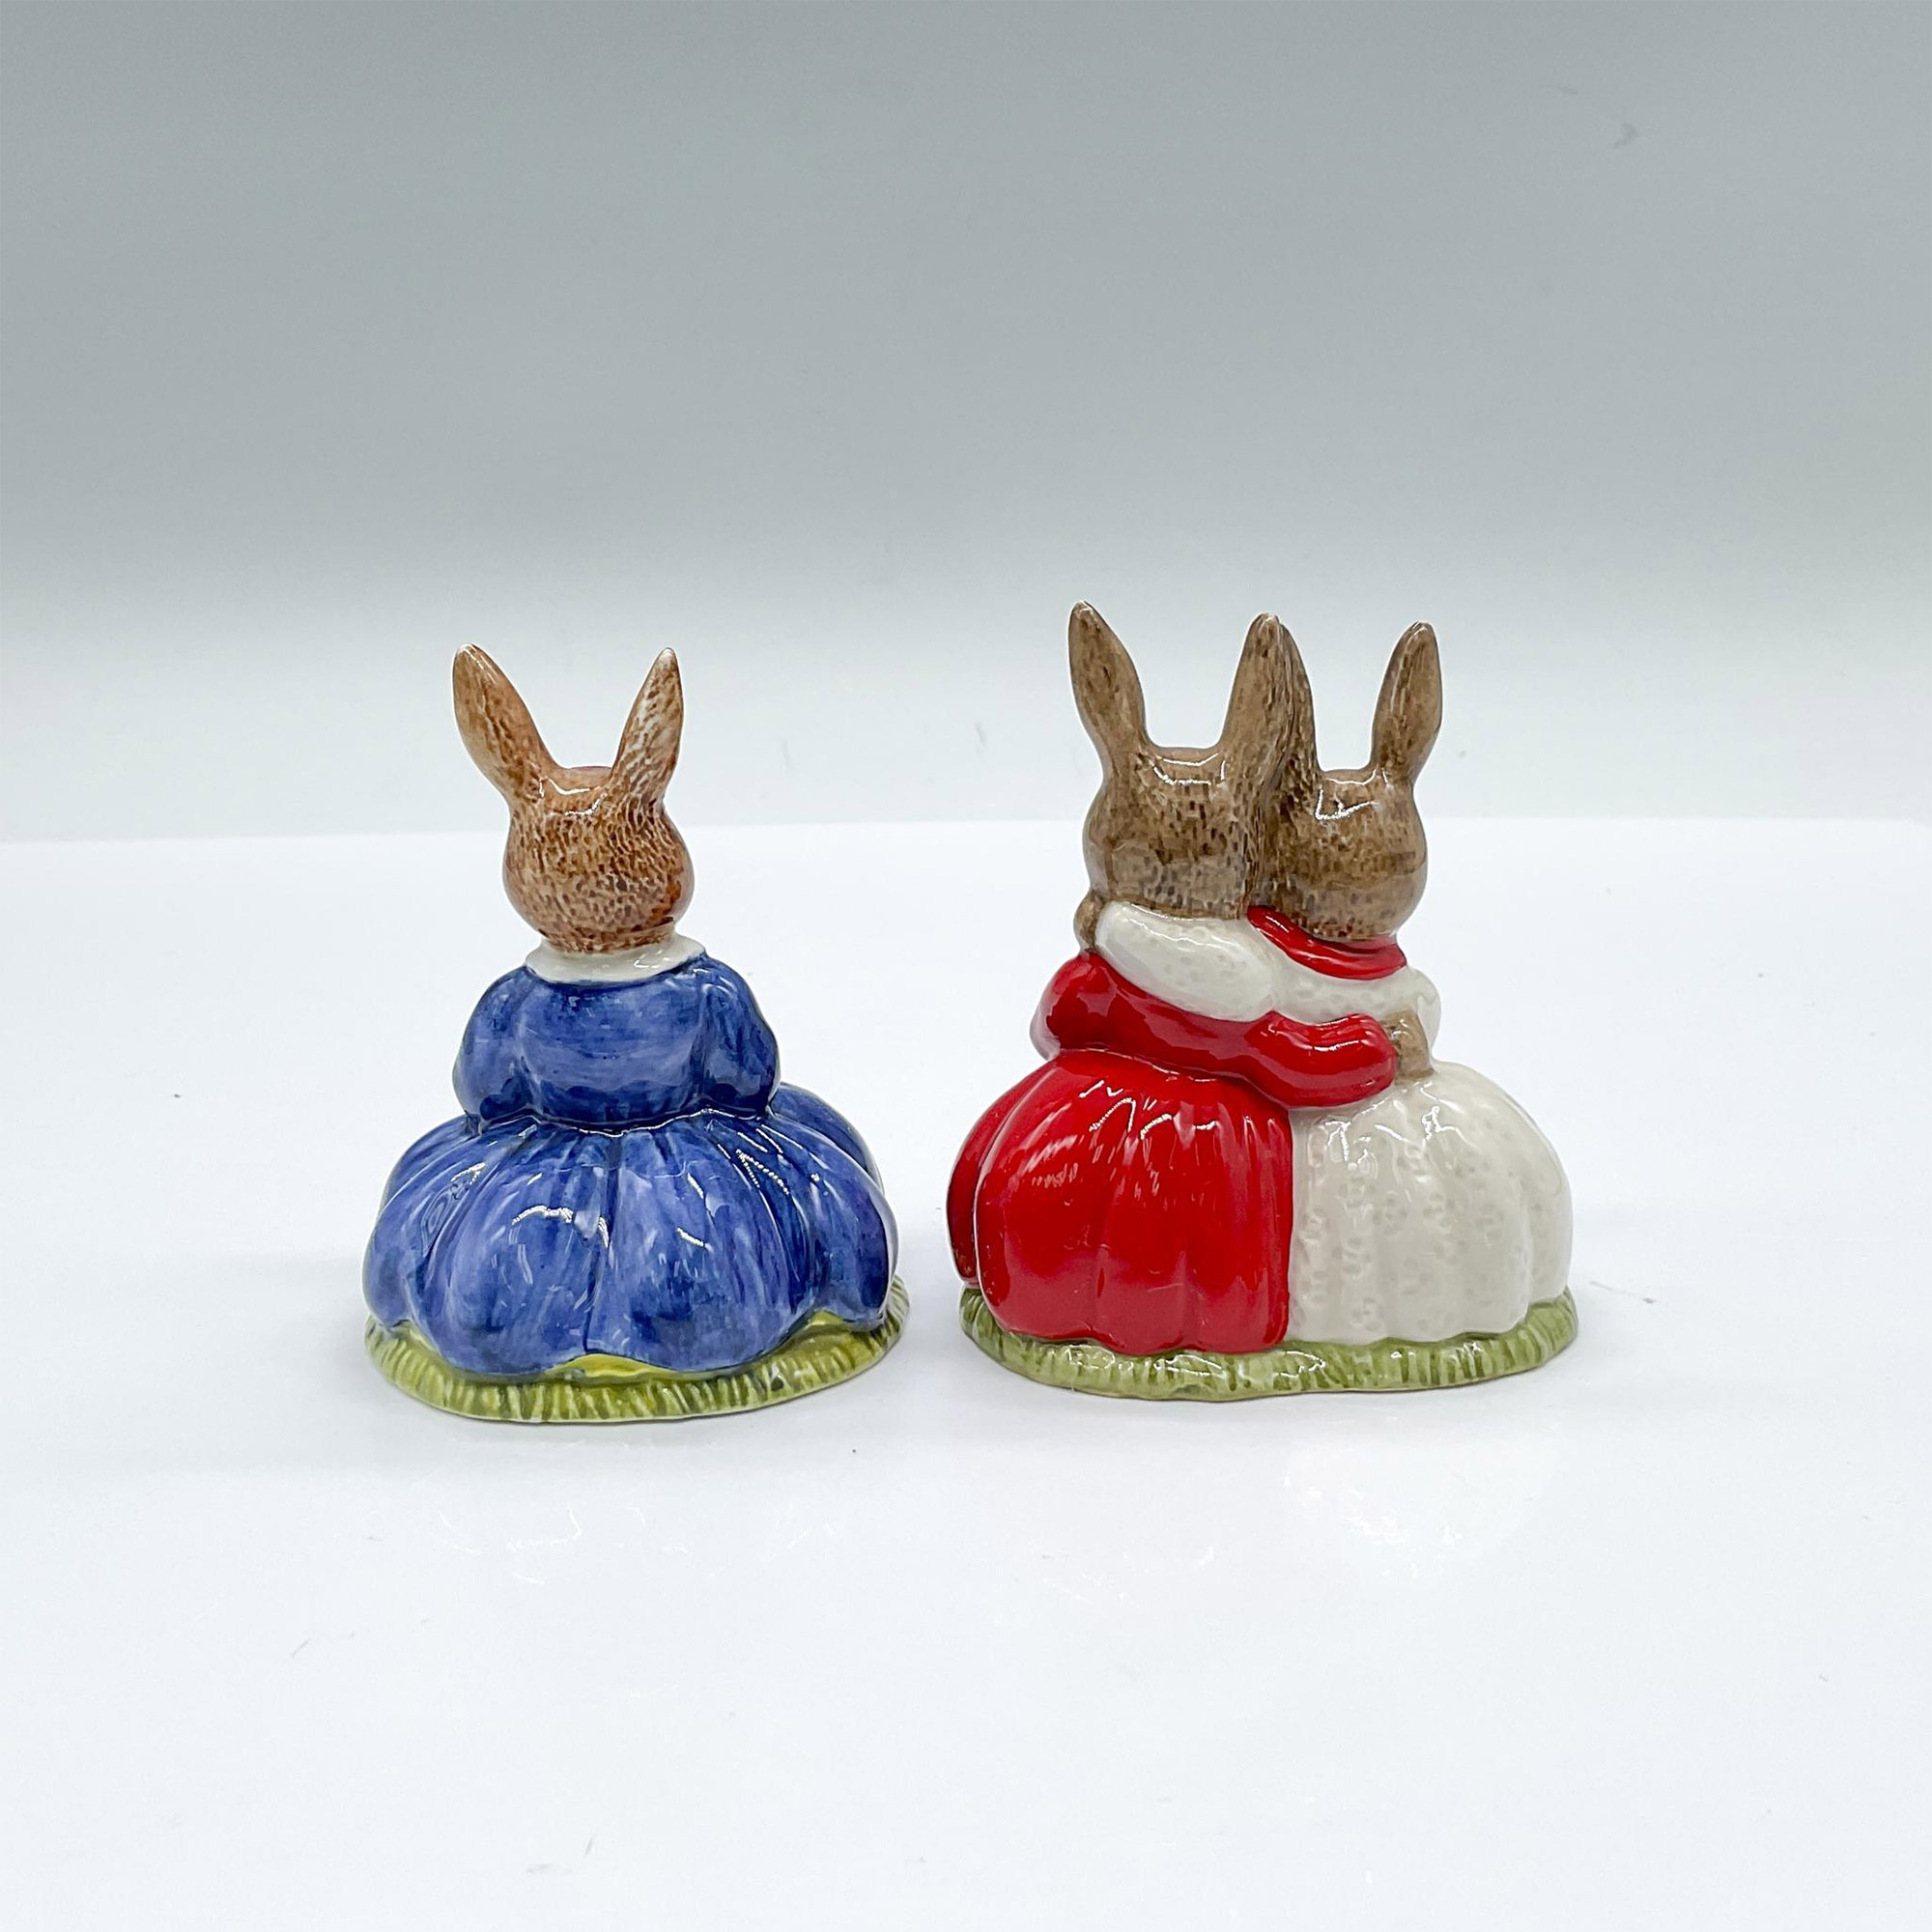 2pc Royal Doulton Bunnykins Figurines, Partners & Daisie - Image 2 of 3